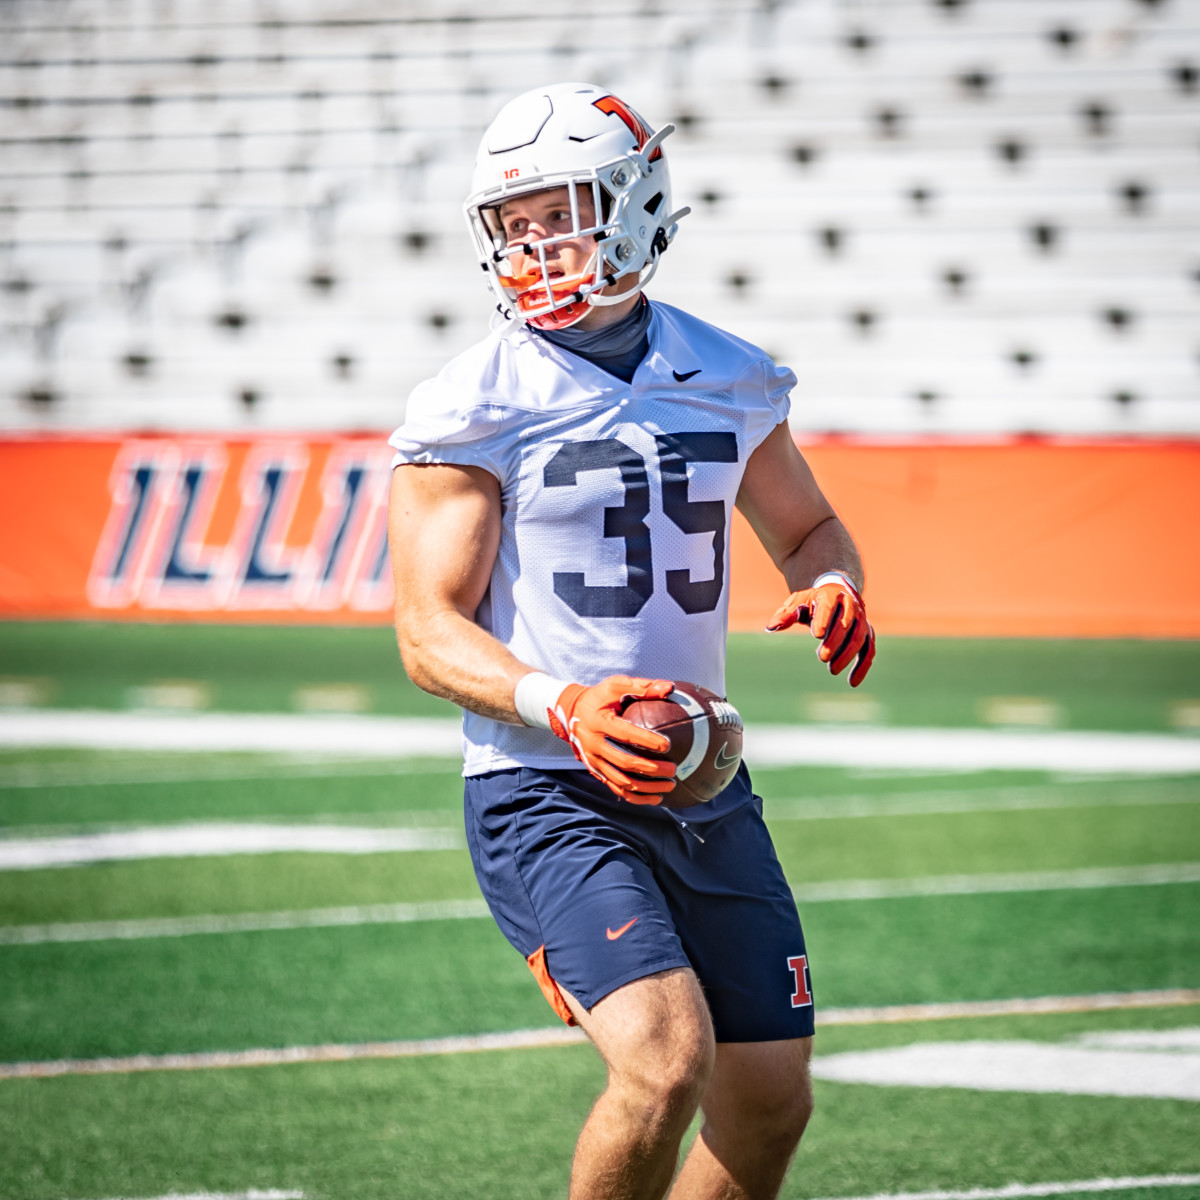 Illinois linebacker Jake Hansen participating in the first preseason practice on Aug. 6 for the 2020 season. Hansen, who is a Butkus Award watch list nominee, will be moving to the middle linebacker spot for his senior year.